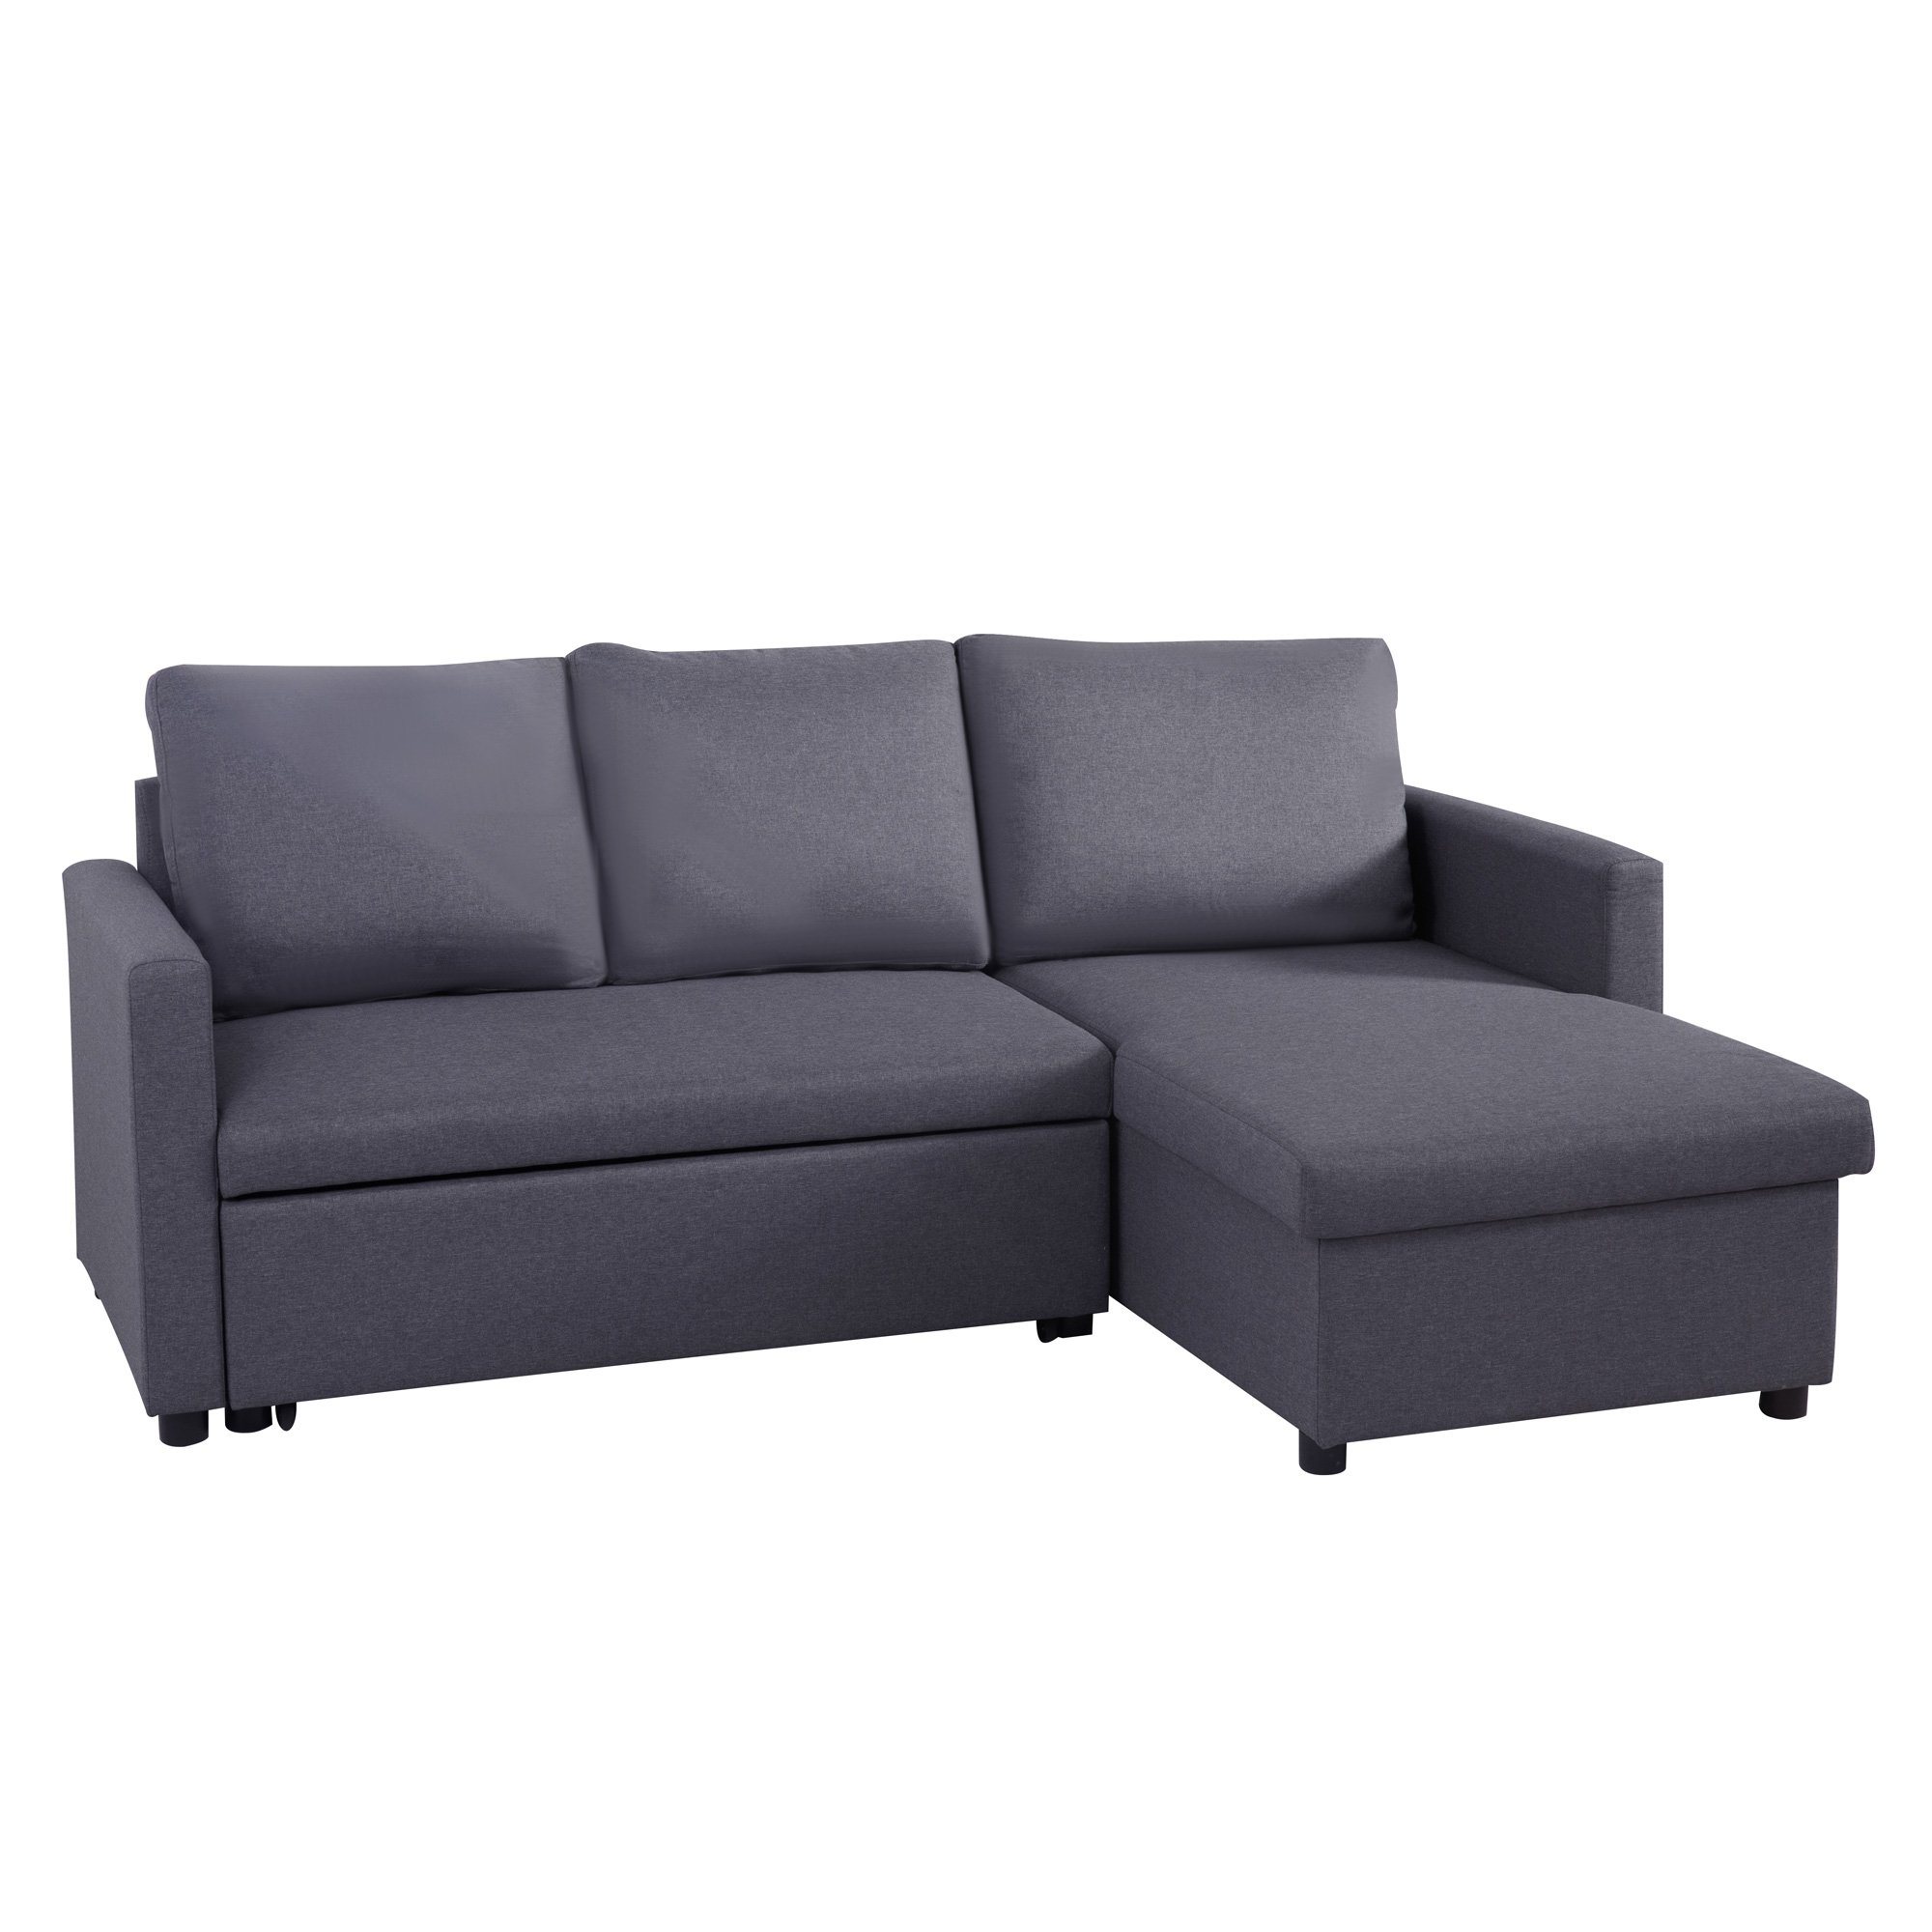 3 Seater Sofa Bed Lounge Storage Couch -Charcoal - Dreamo Living